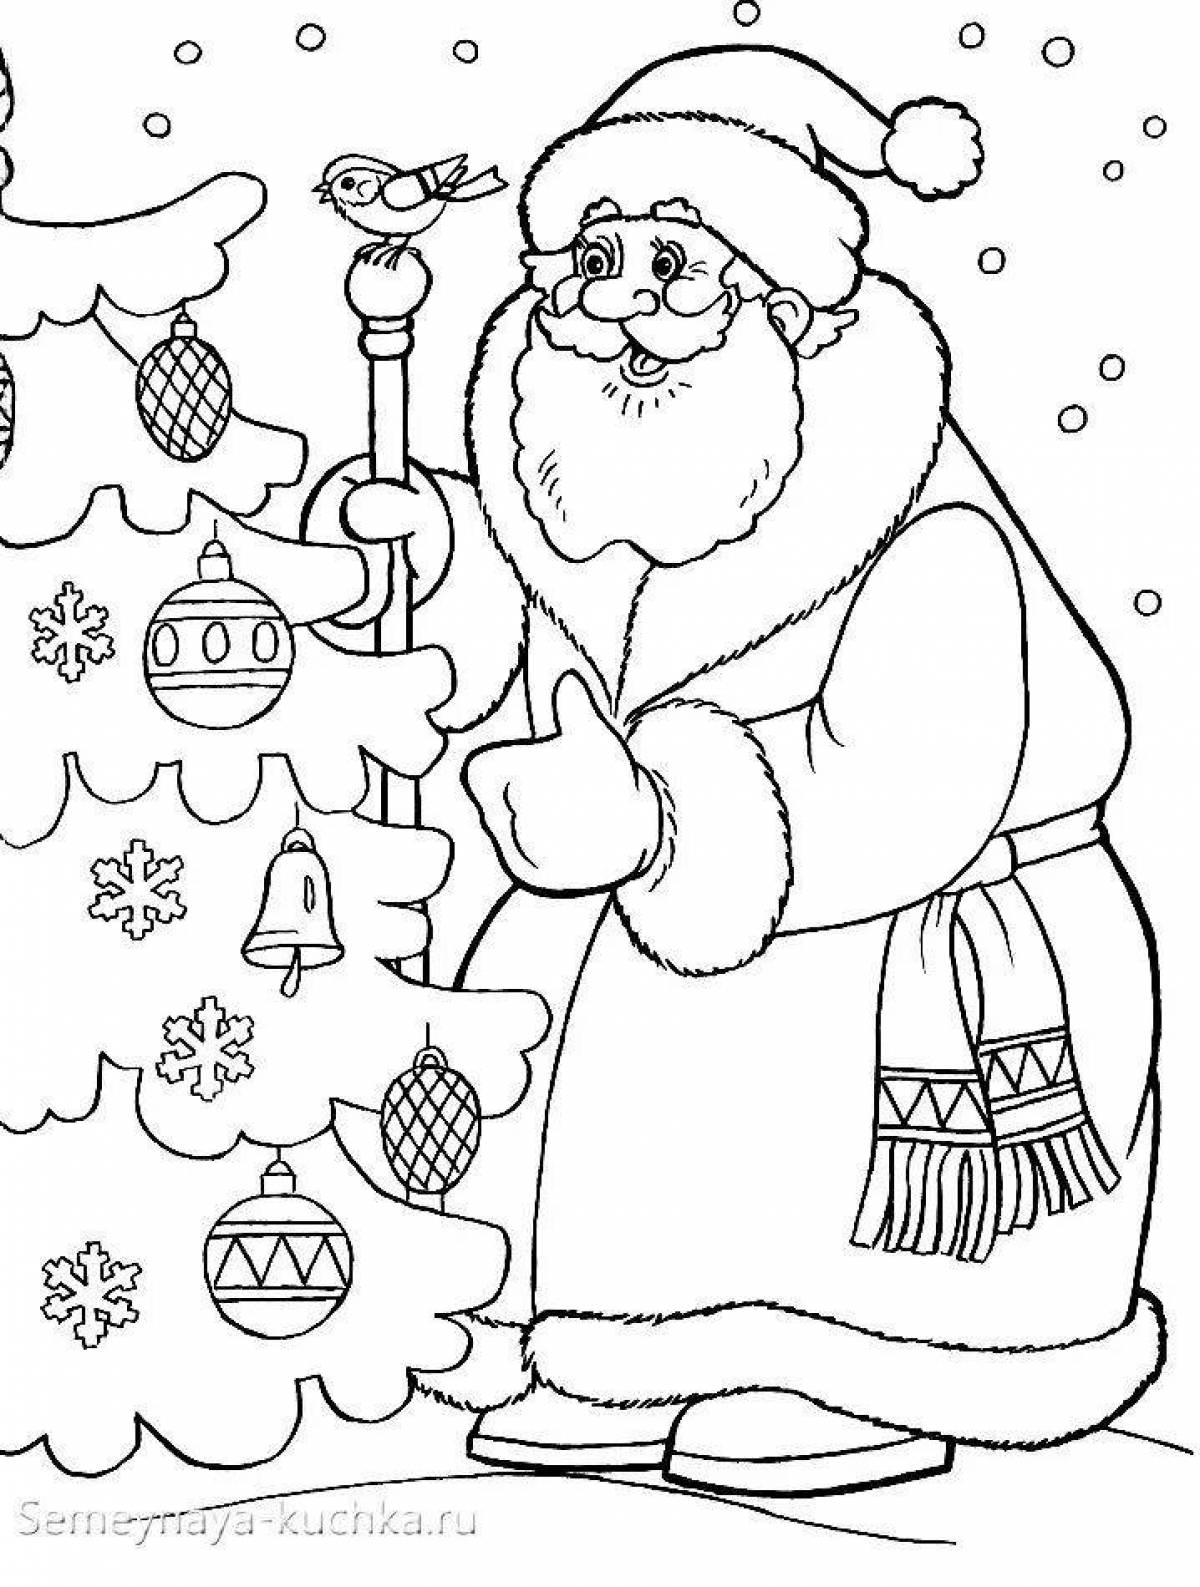 Glowing Christmas coloring book